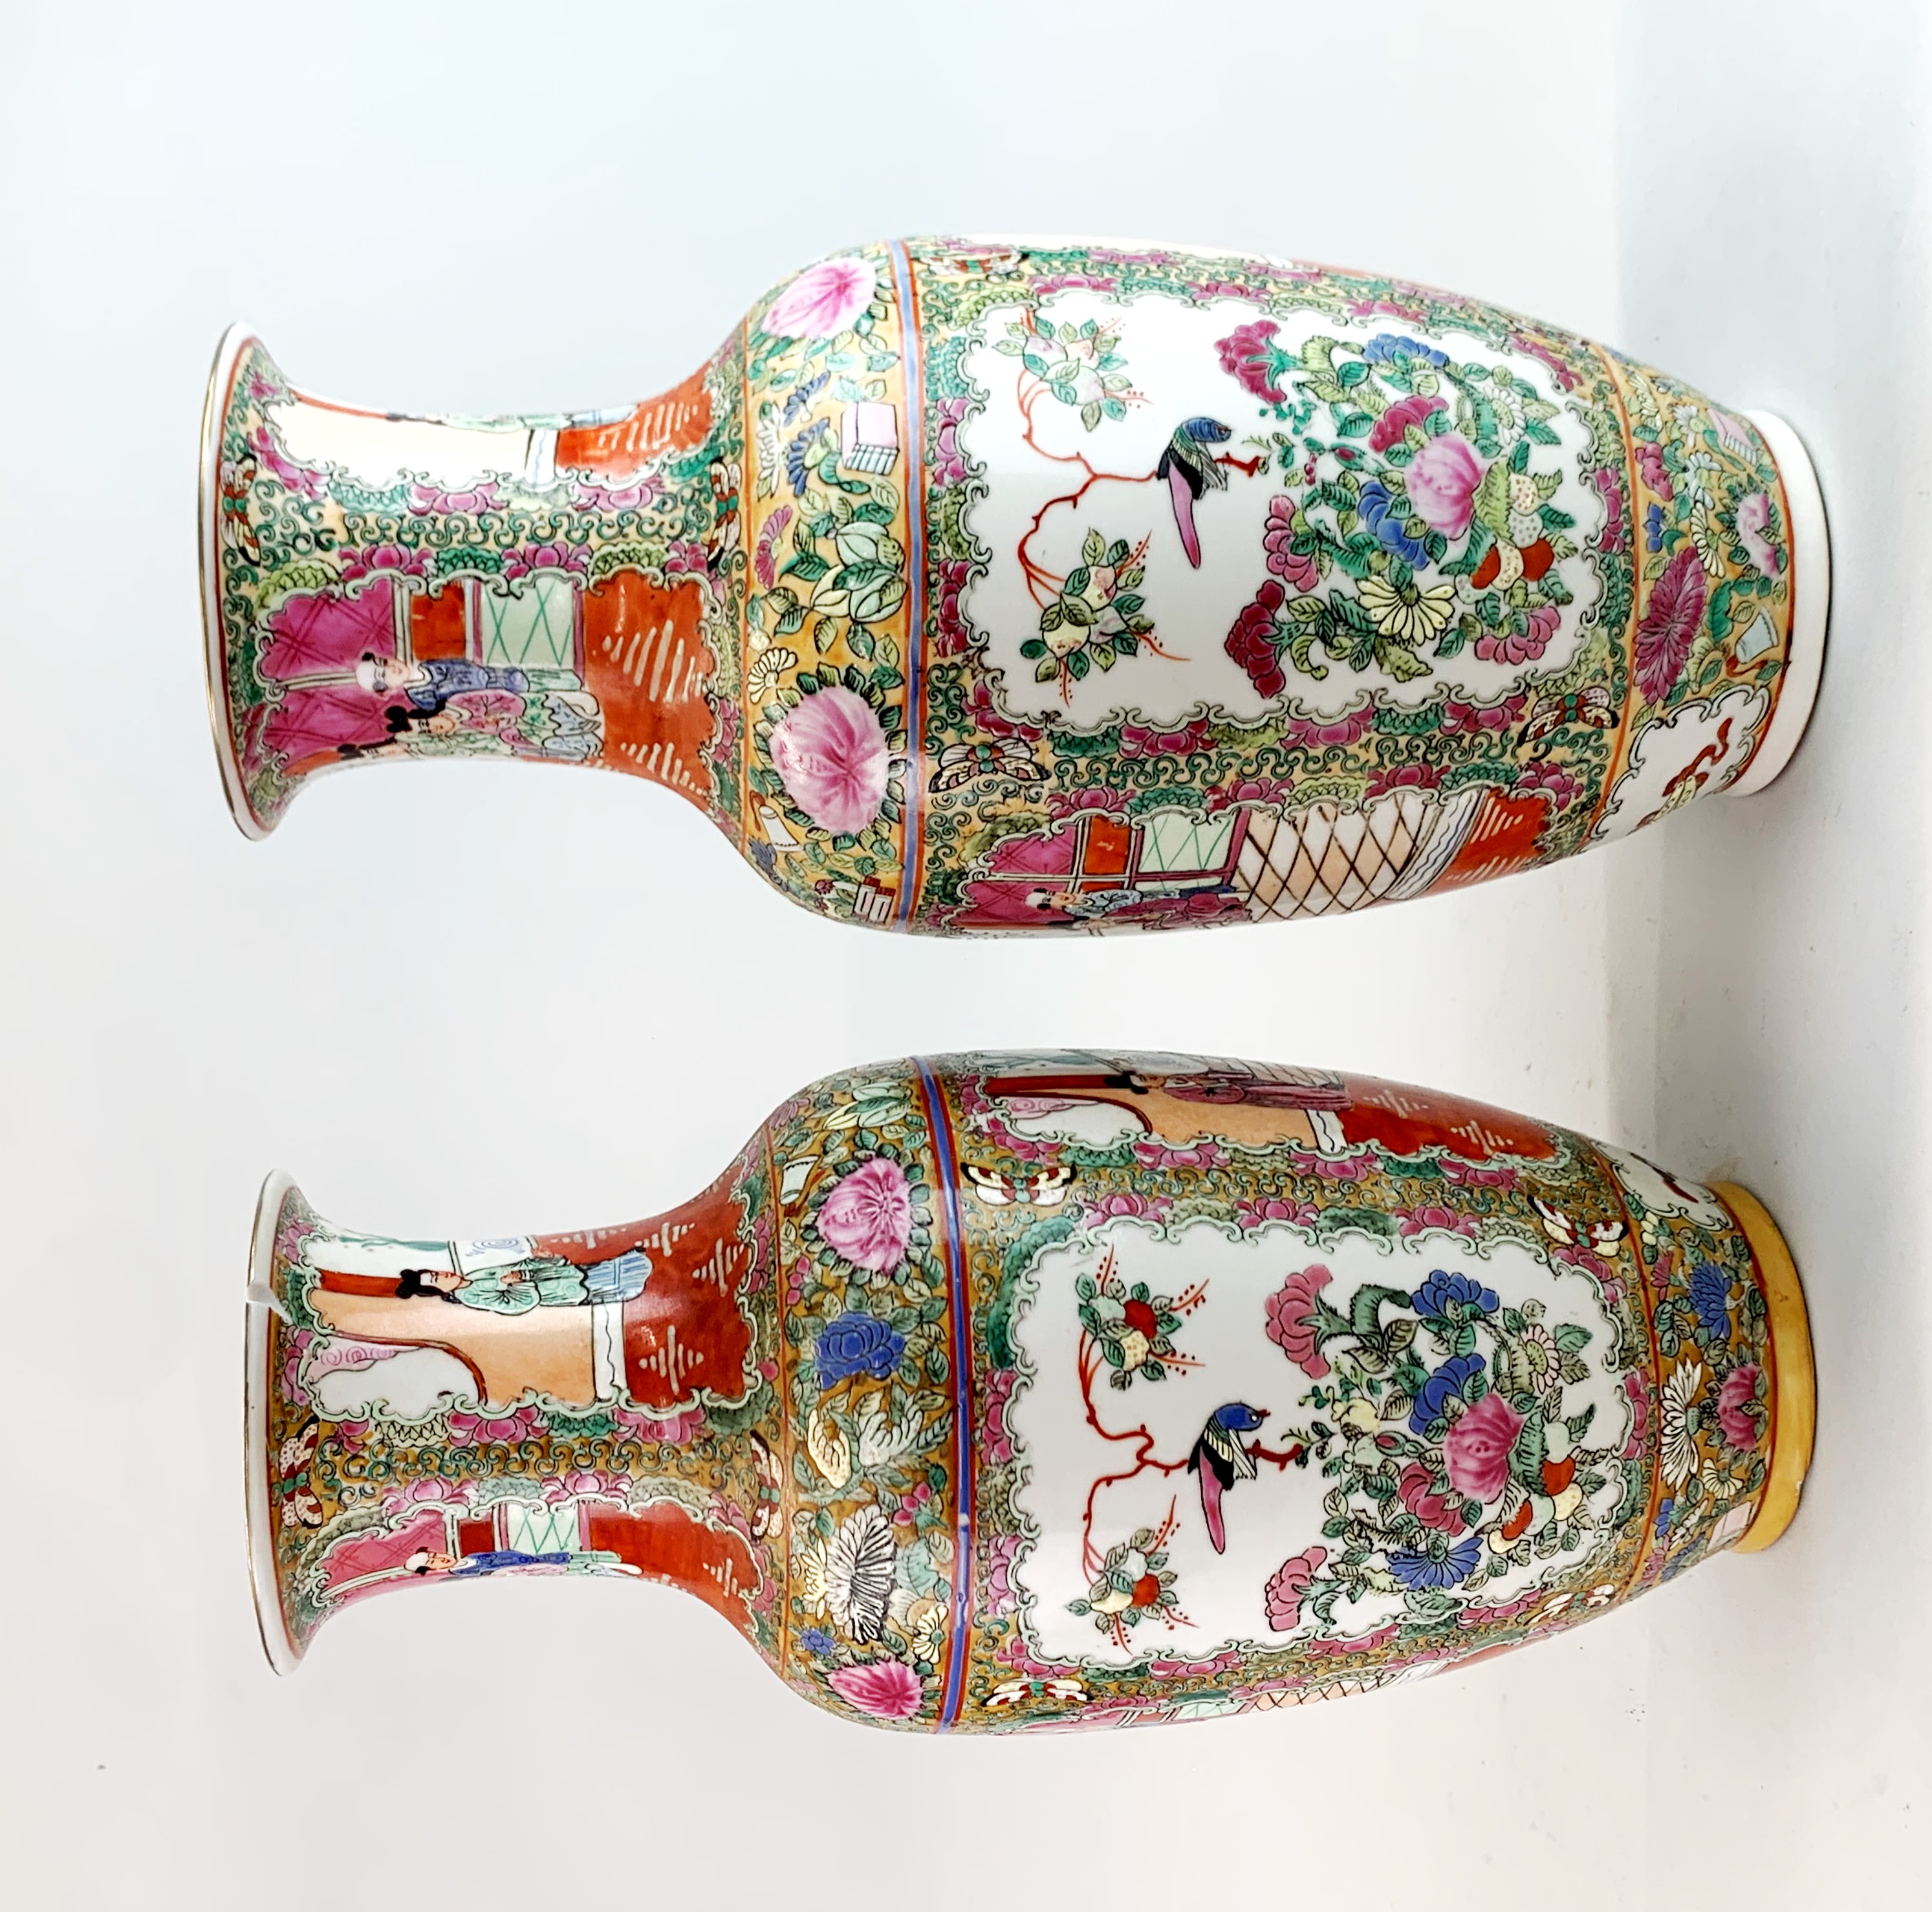 A pair of Chinese Canton enamelled porcelain vases, H. 37cm.